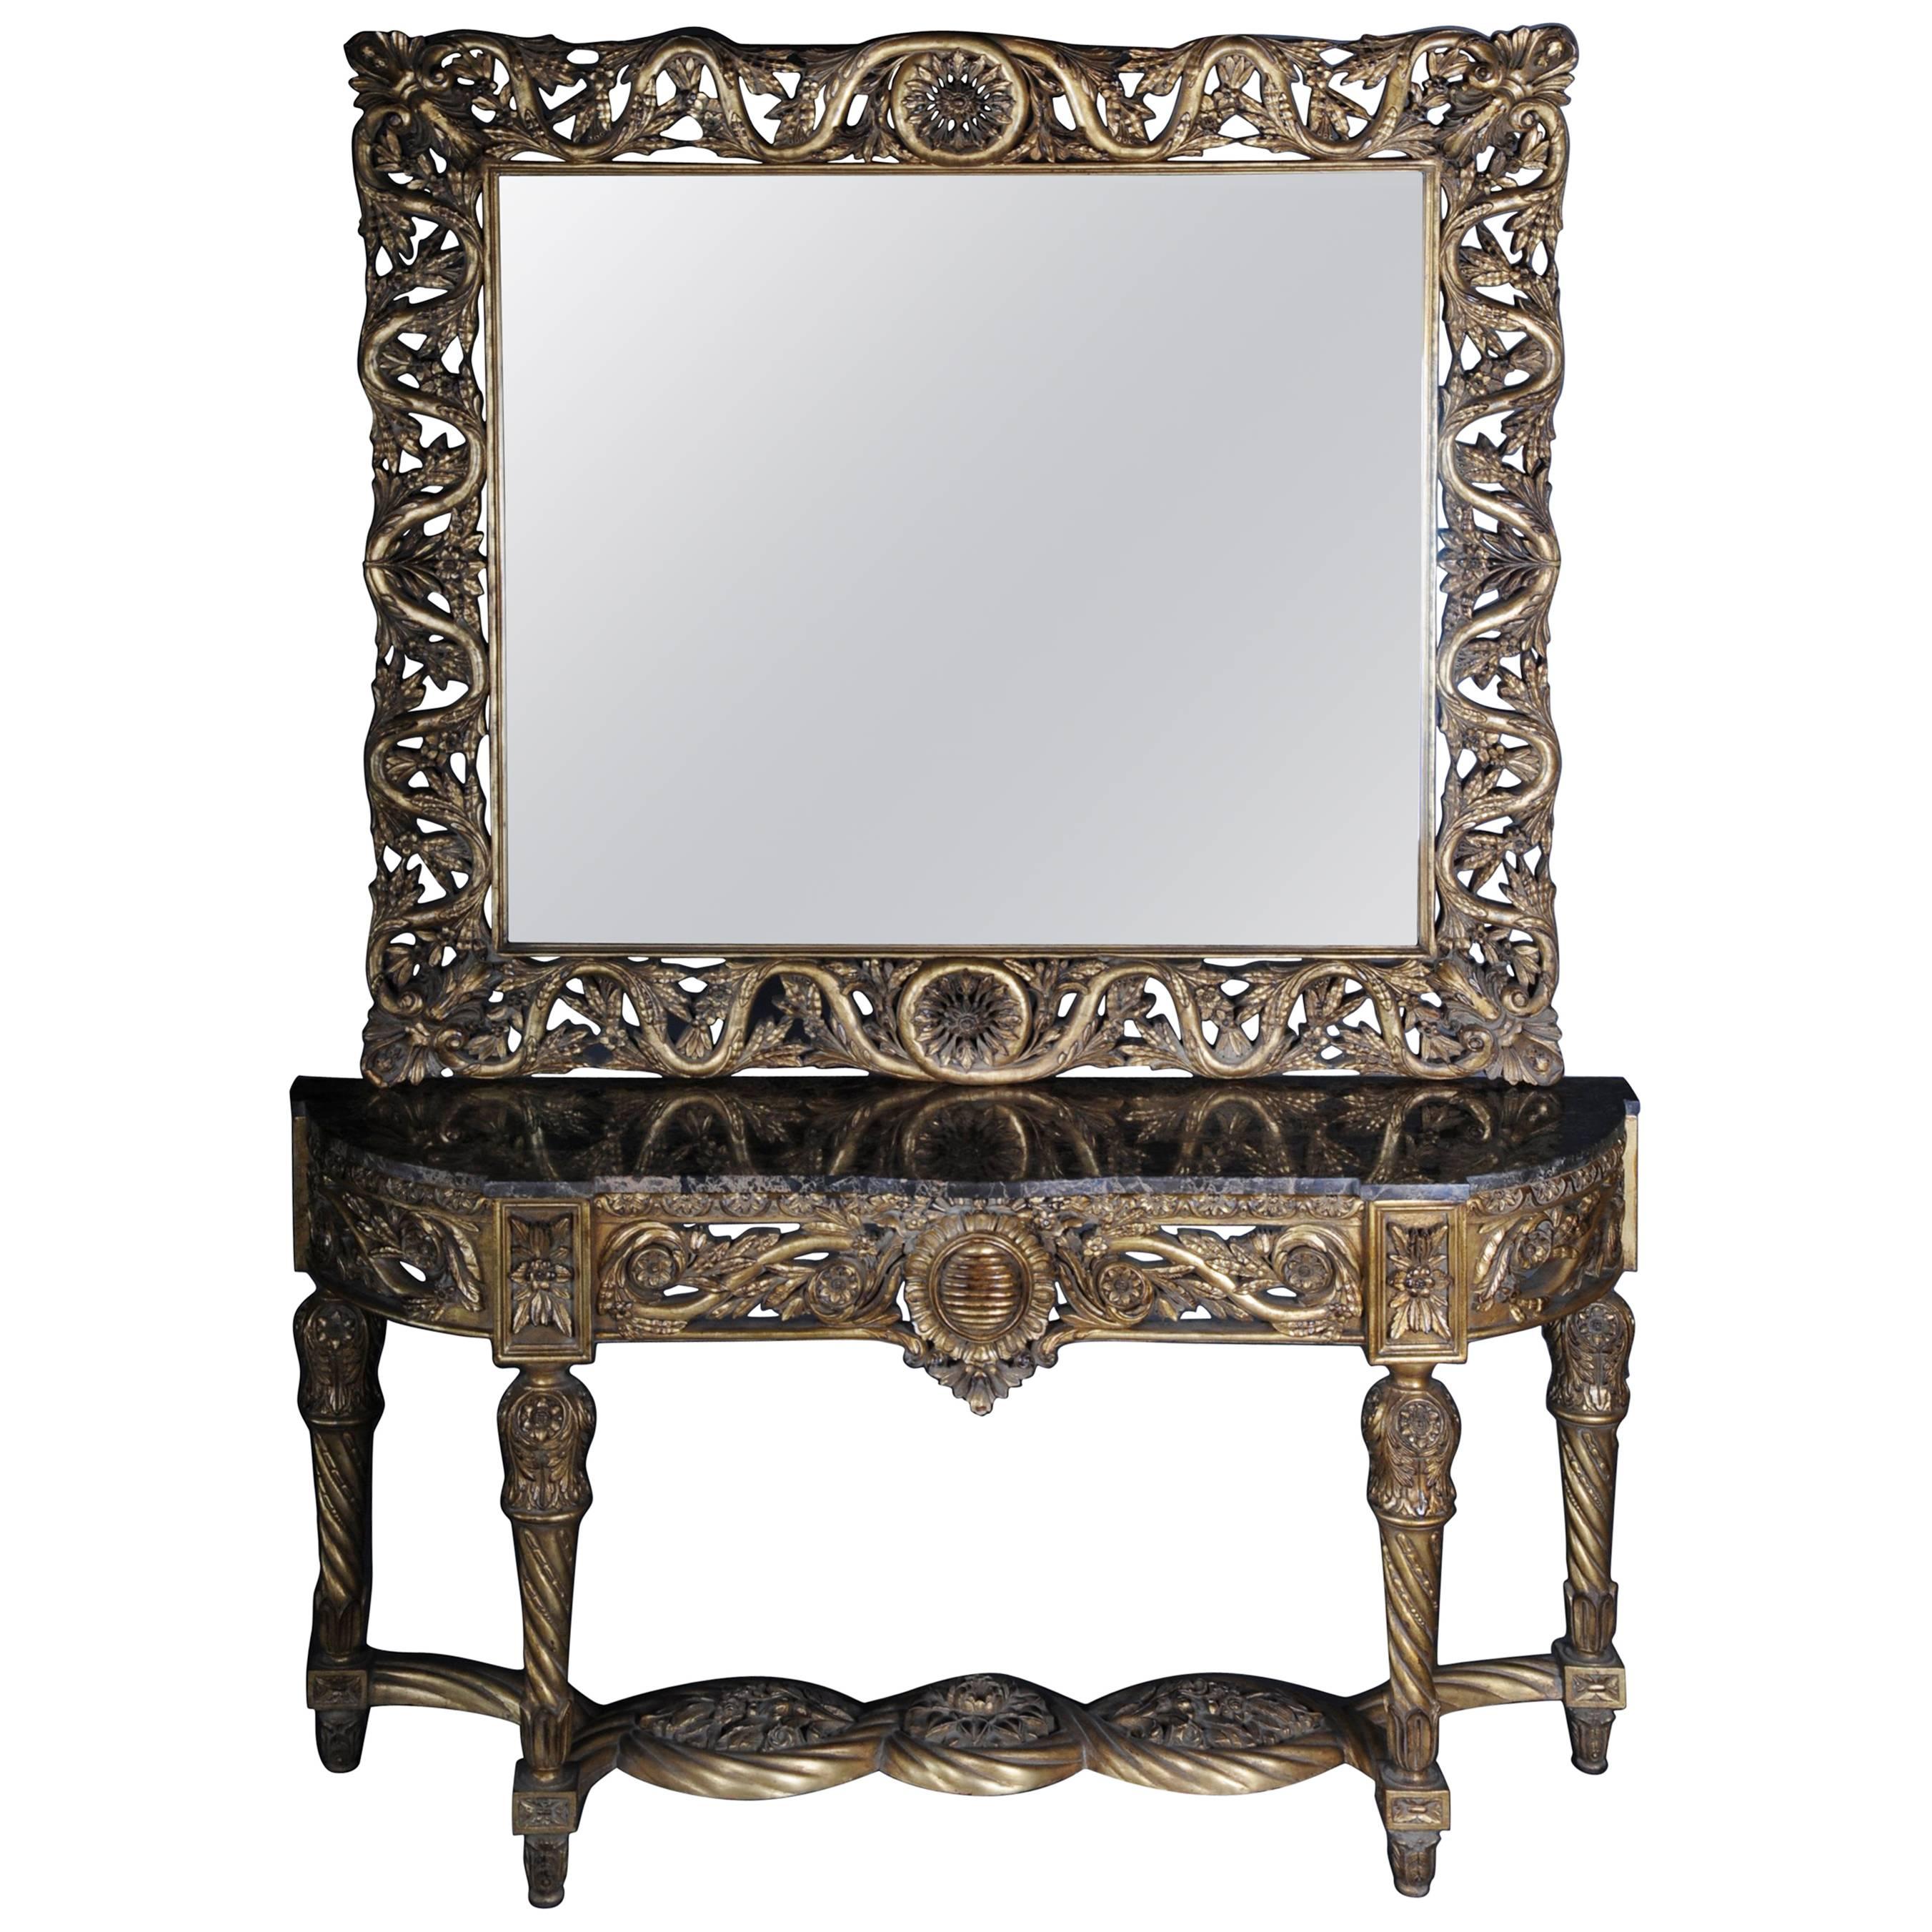 Luxurious Mirror Console, Sideboard, Table with Mirror, Louis XVI